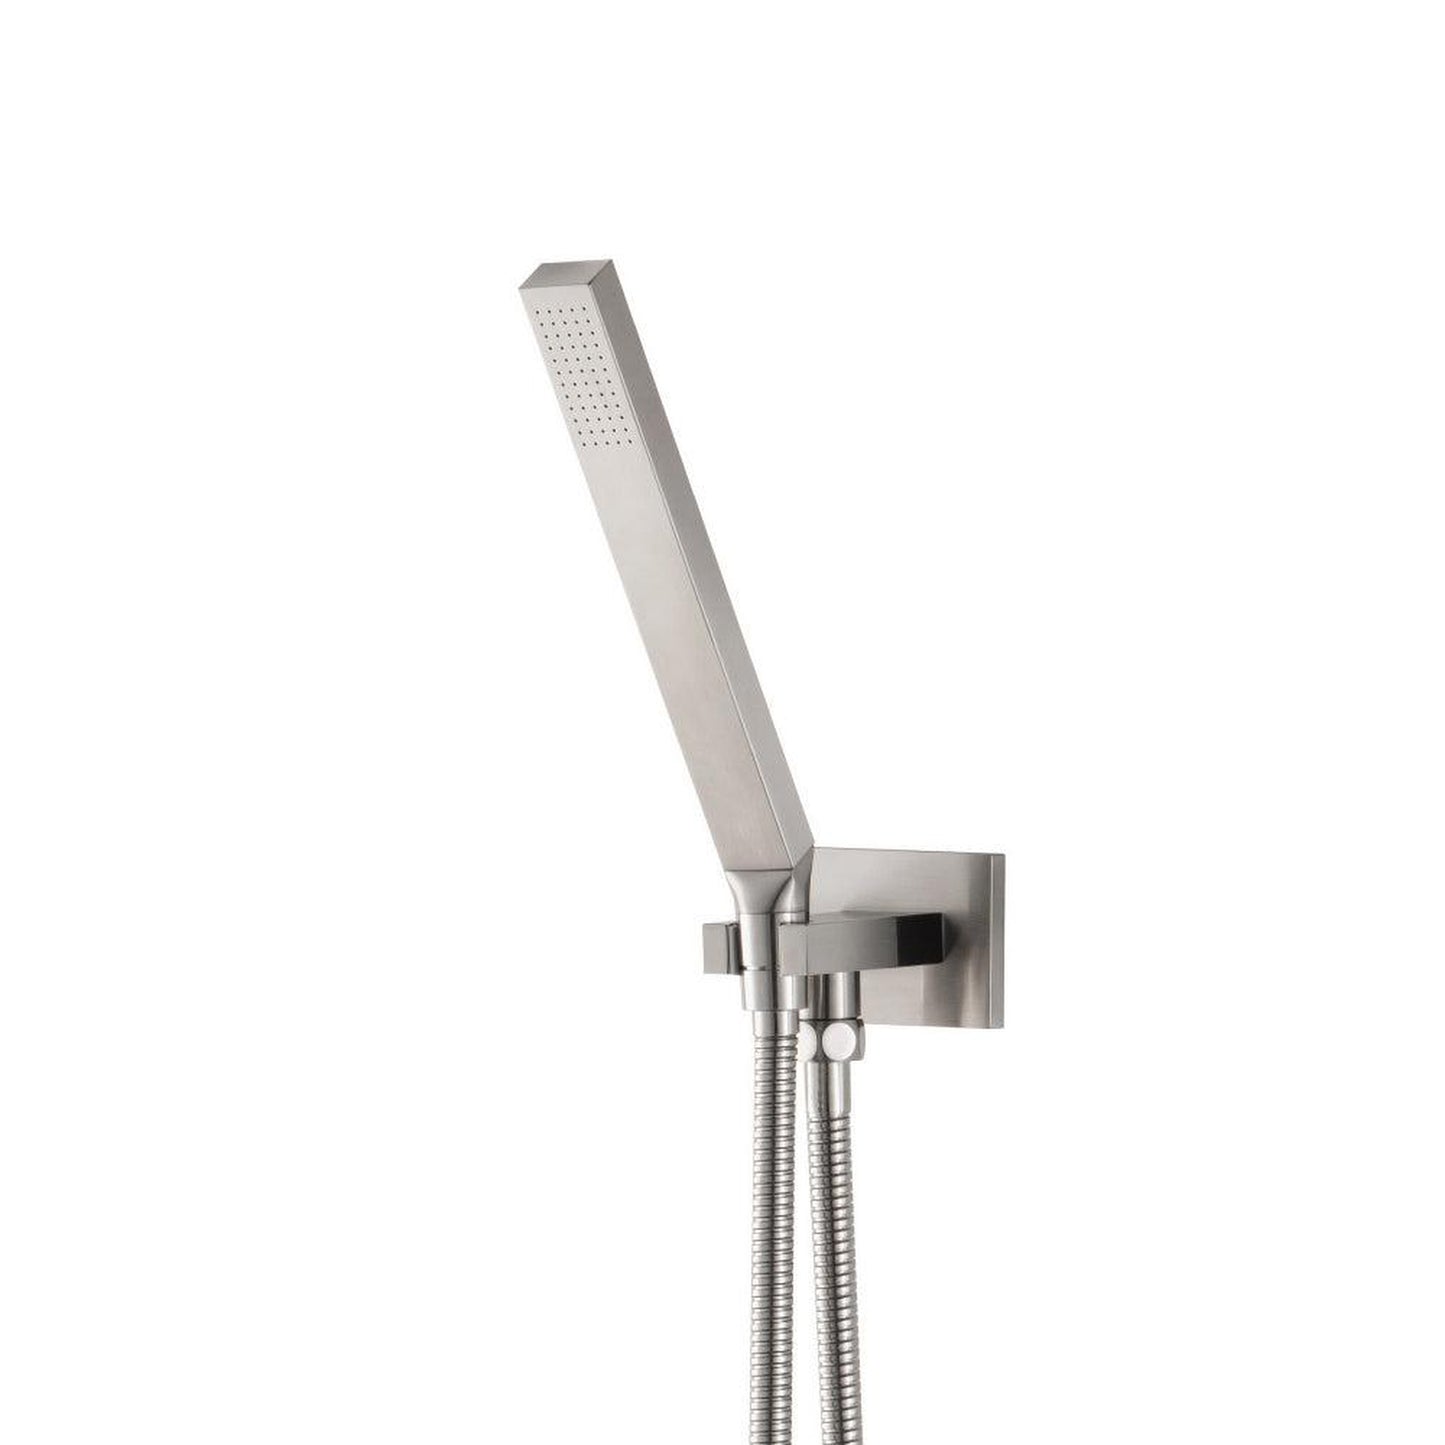 Isenberg Universal Fixtures Hand Shower Set With Wall Elbow, Holder and Hose in Brushed Nickel (HS1003BN)